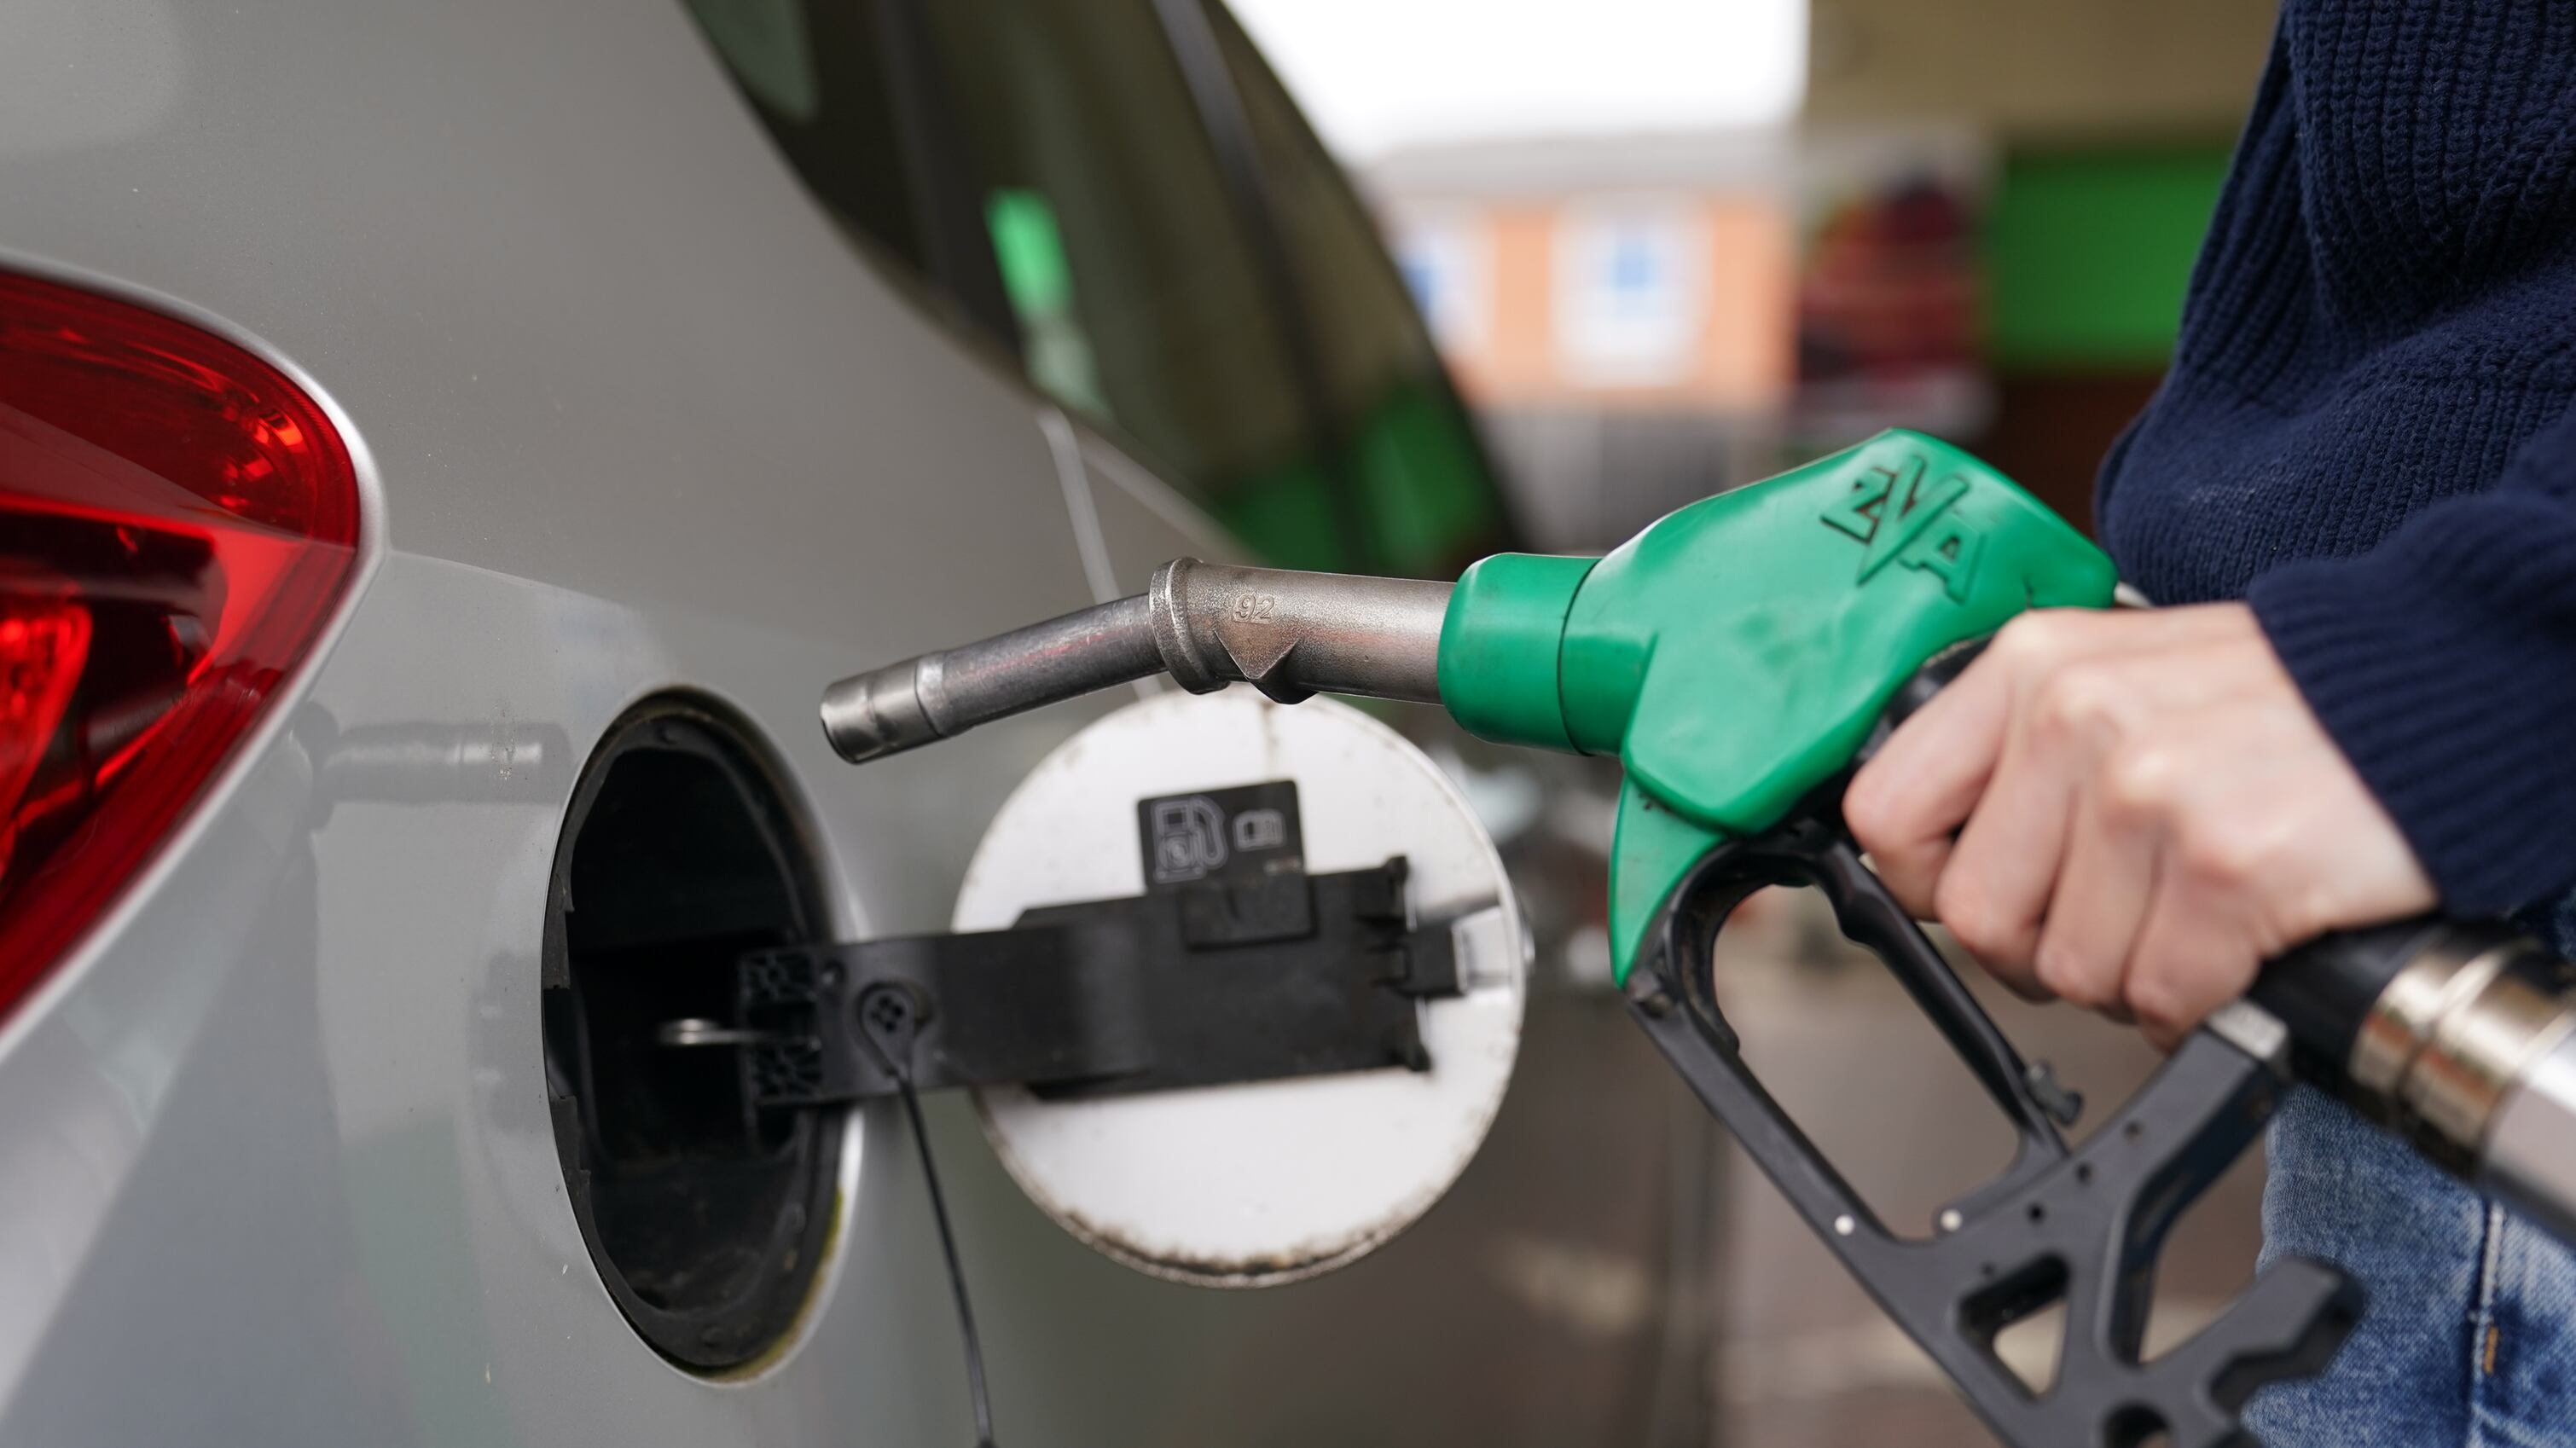 Drivers are suffering from ‘unfairly high margins’ on fuel sales, a Cabinet minister has been warned